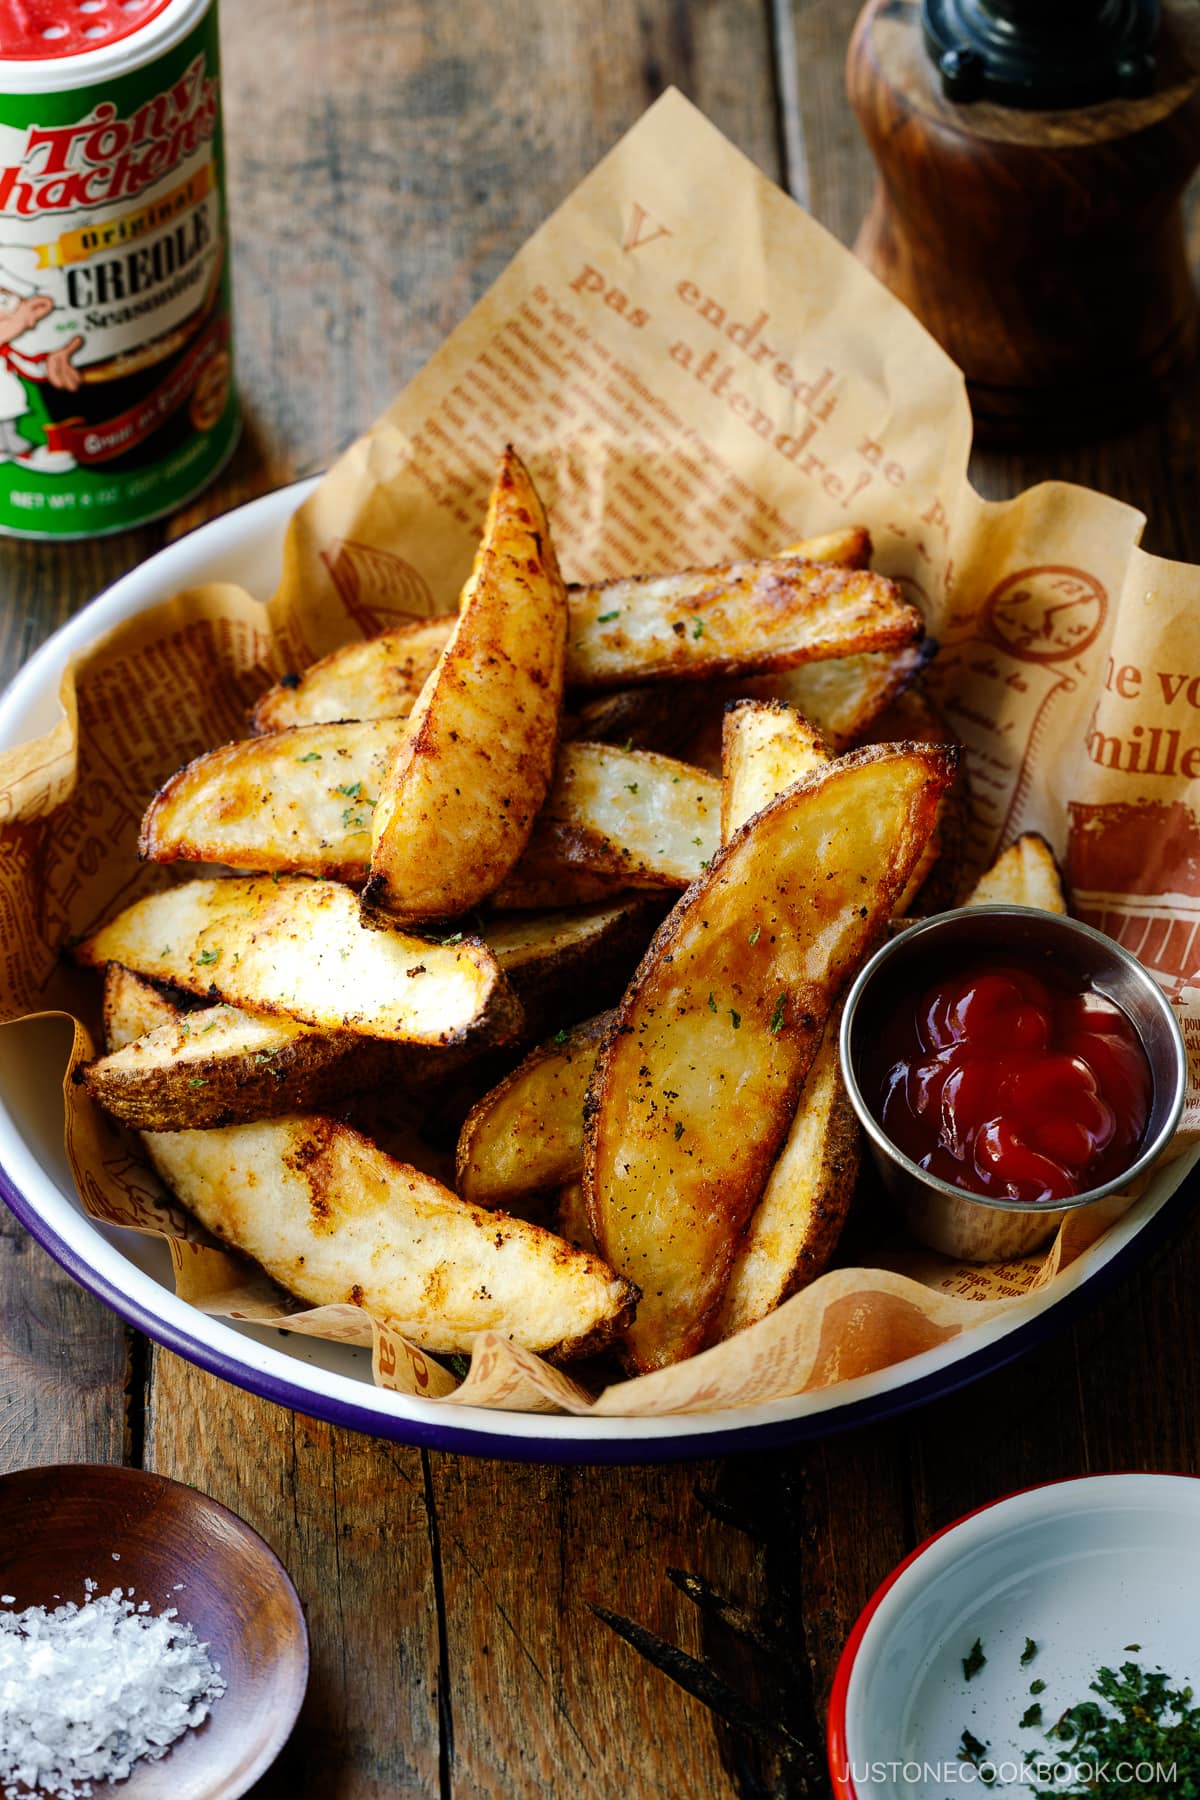 A white and blue enamel bowl containing Crispy Baked Potato Wedges with ketchu in a mini container.